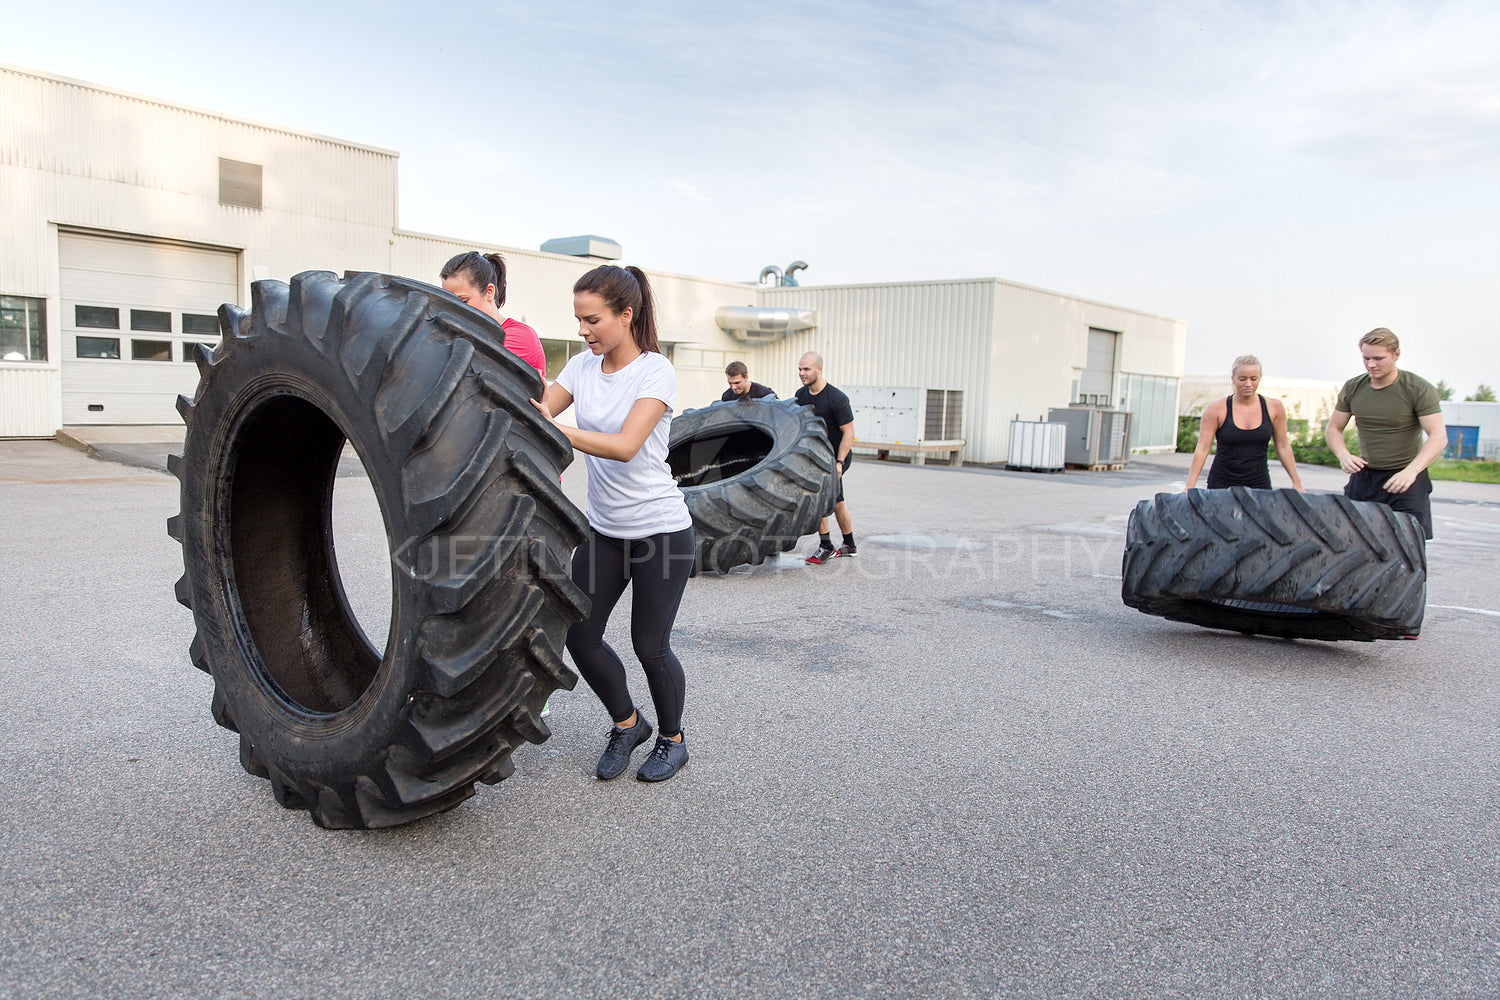 Fitness team flipping heavy tires as workout